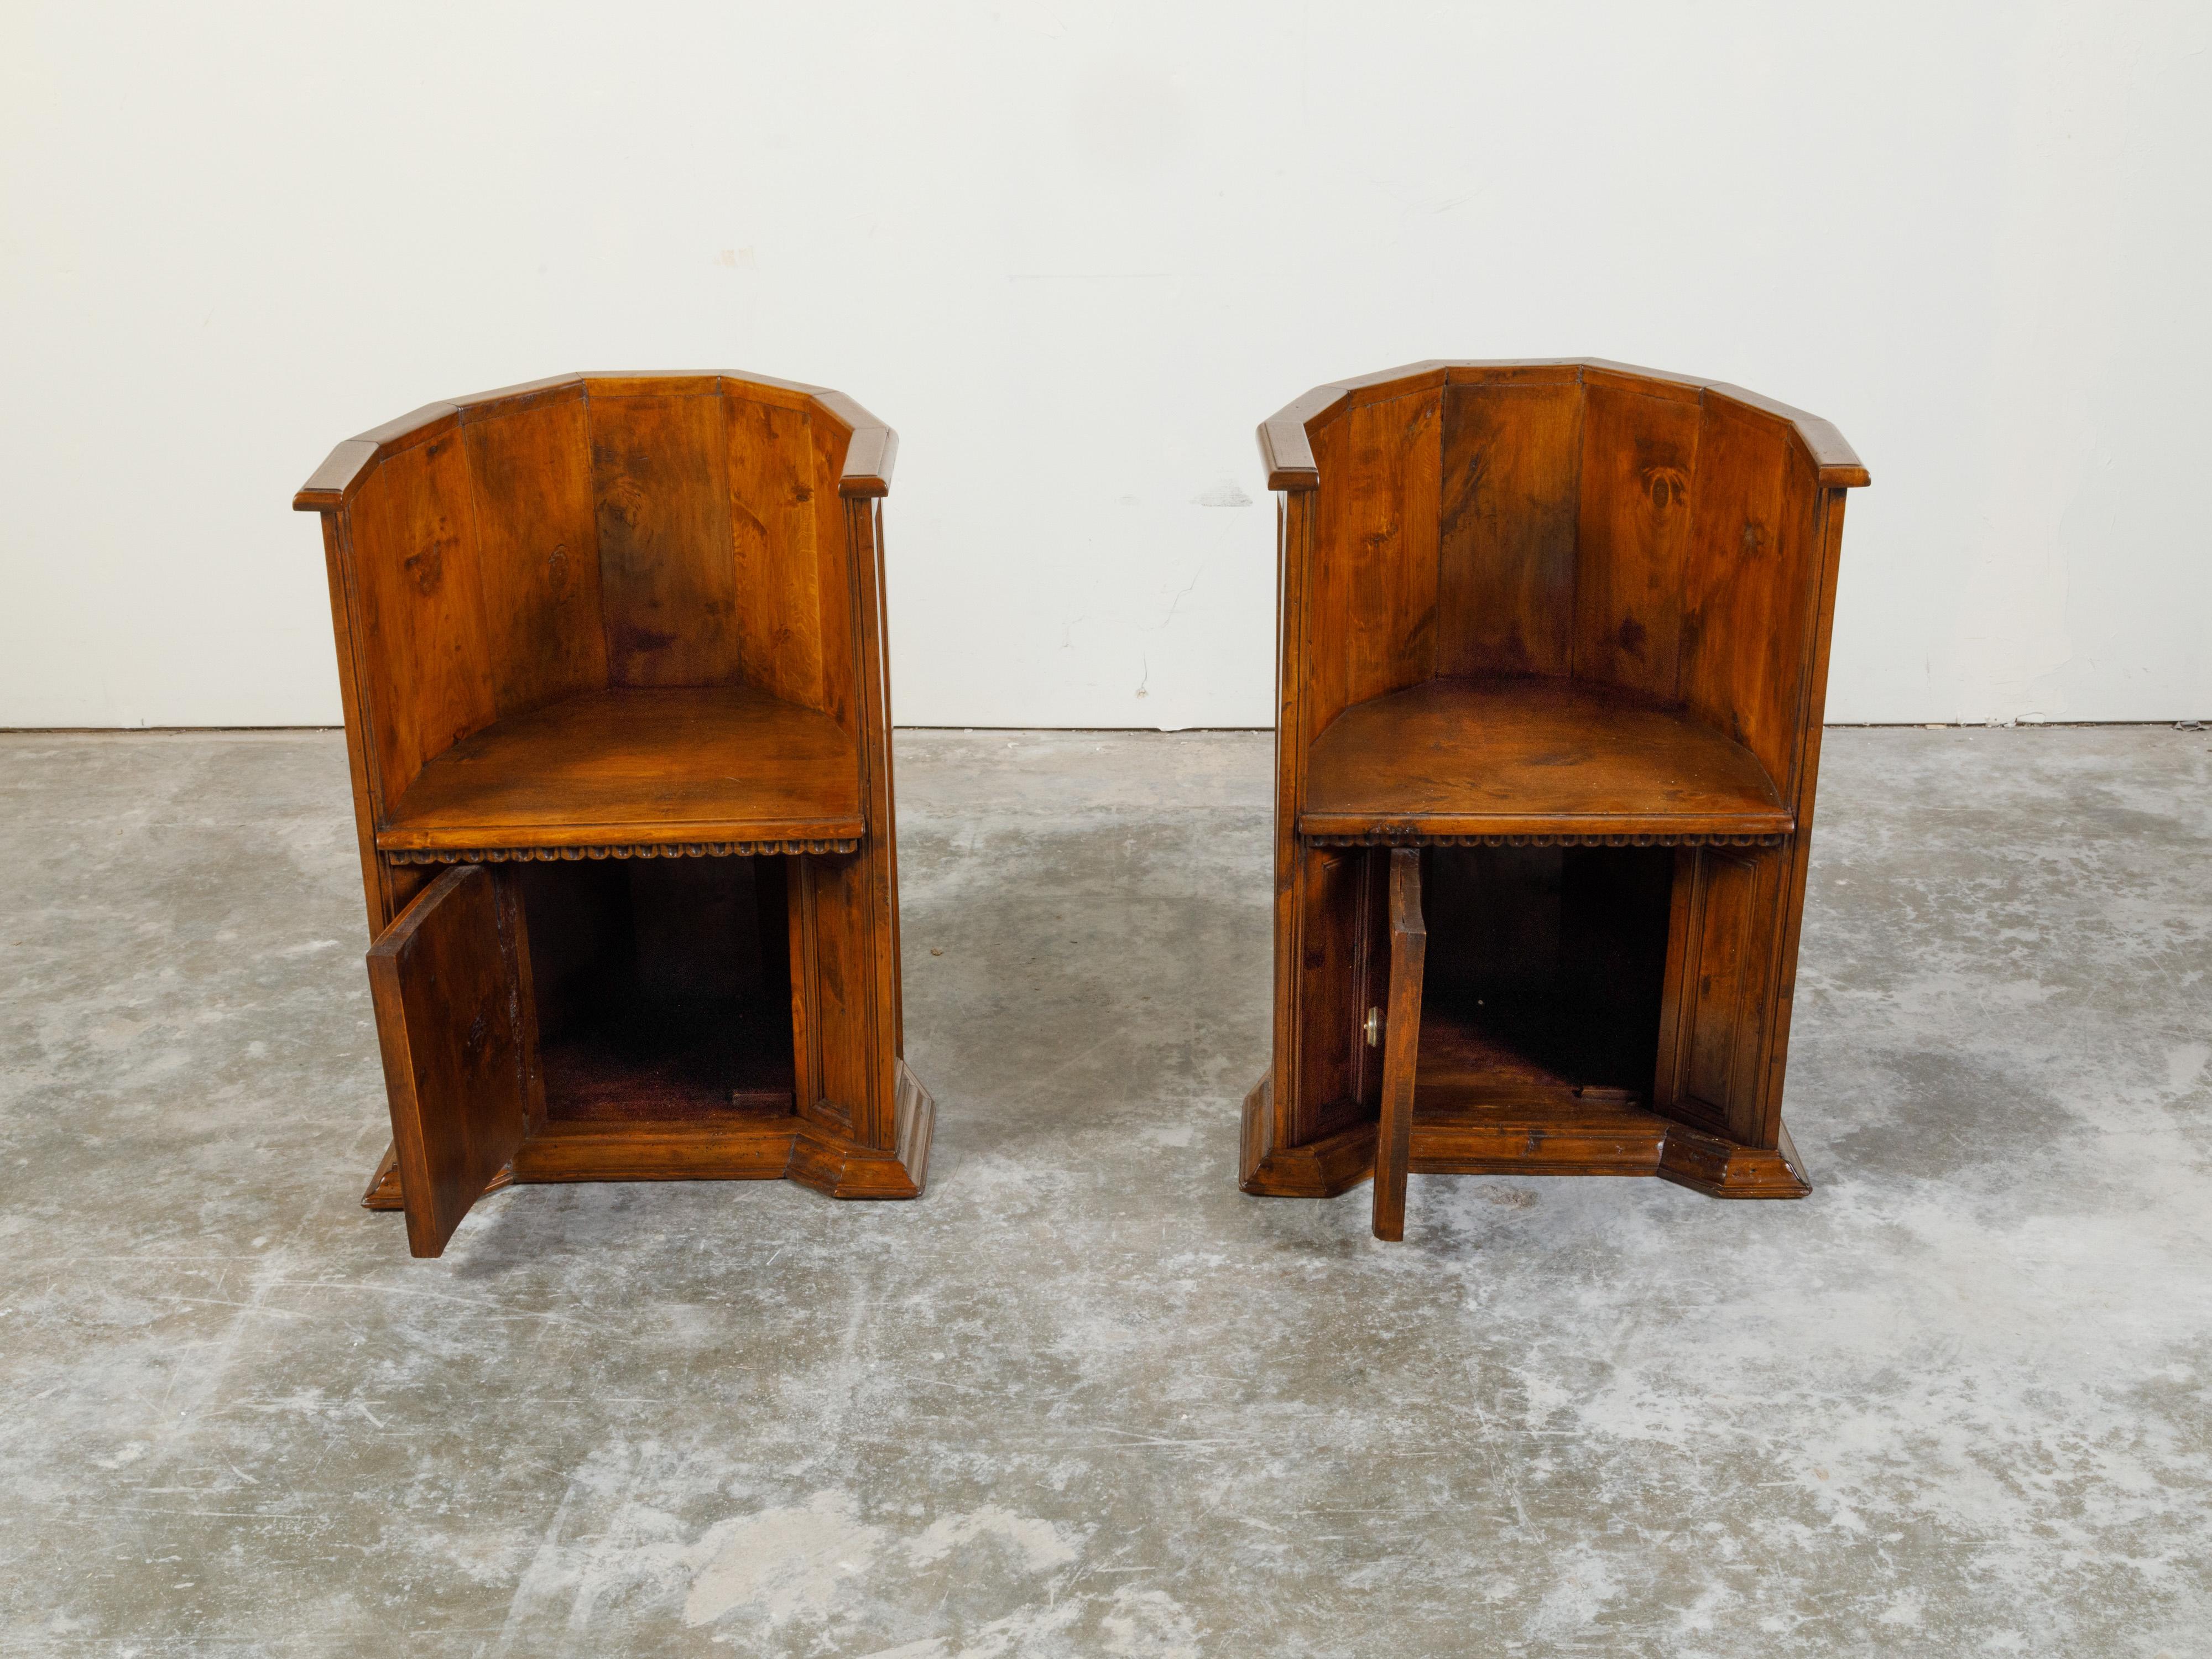 Carved Pair of Italian 19th Century Renaissance Style Wooden Chairs with Lower Doors For Sale